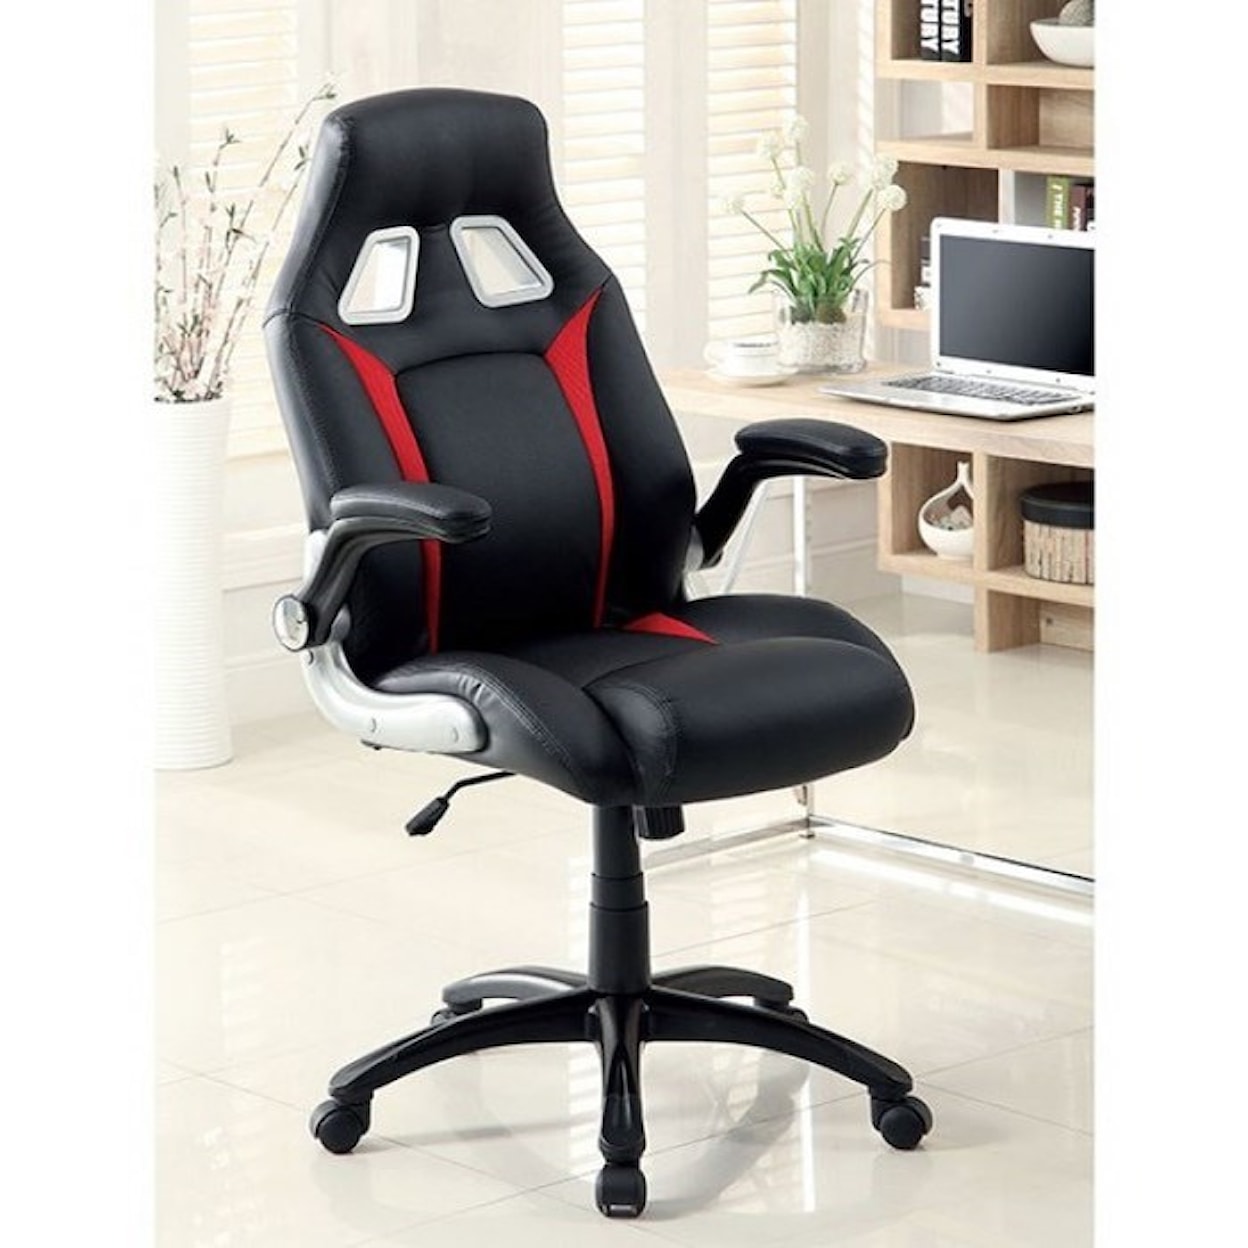 Furniture of America Argon Office Chair